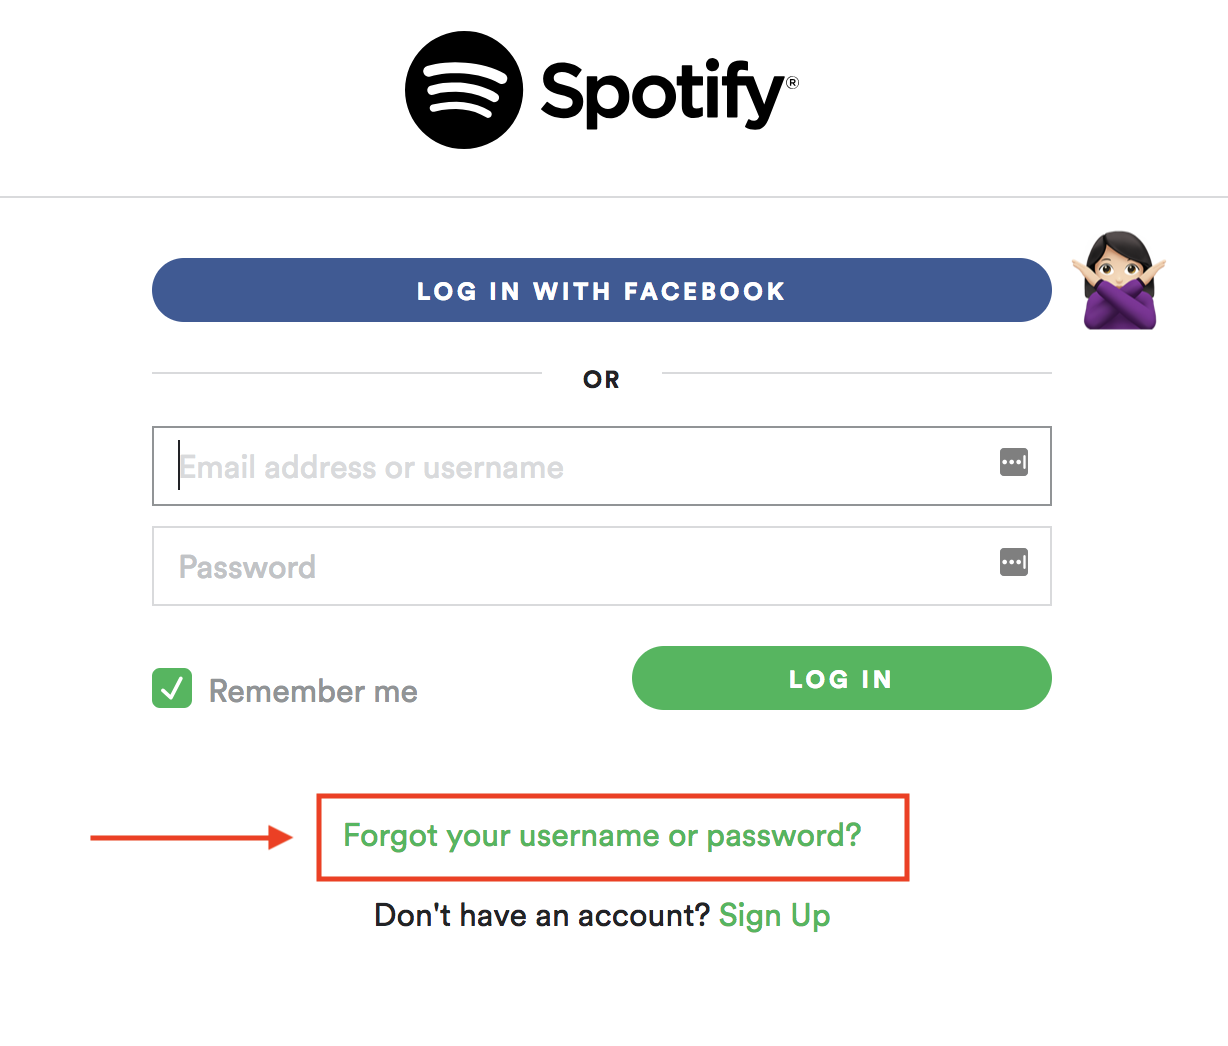 spotify logged me out and changed my password